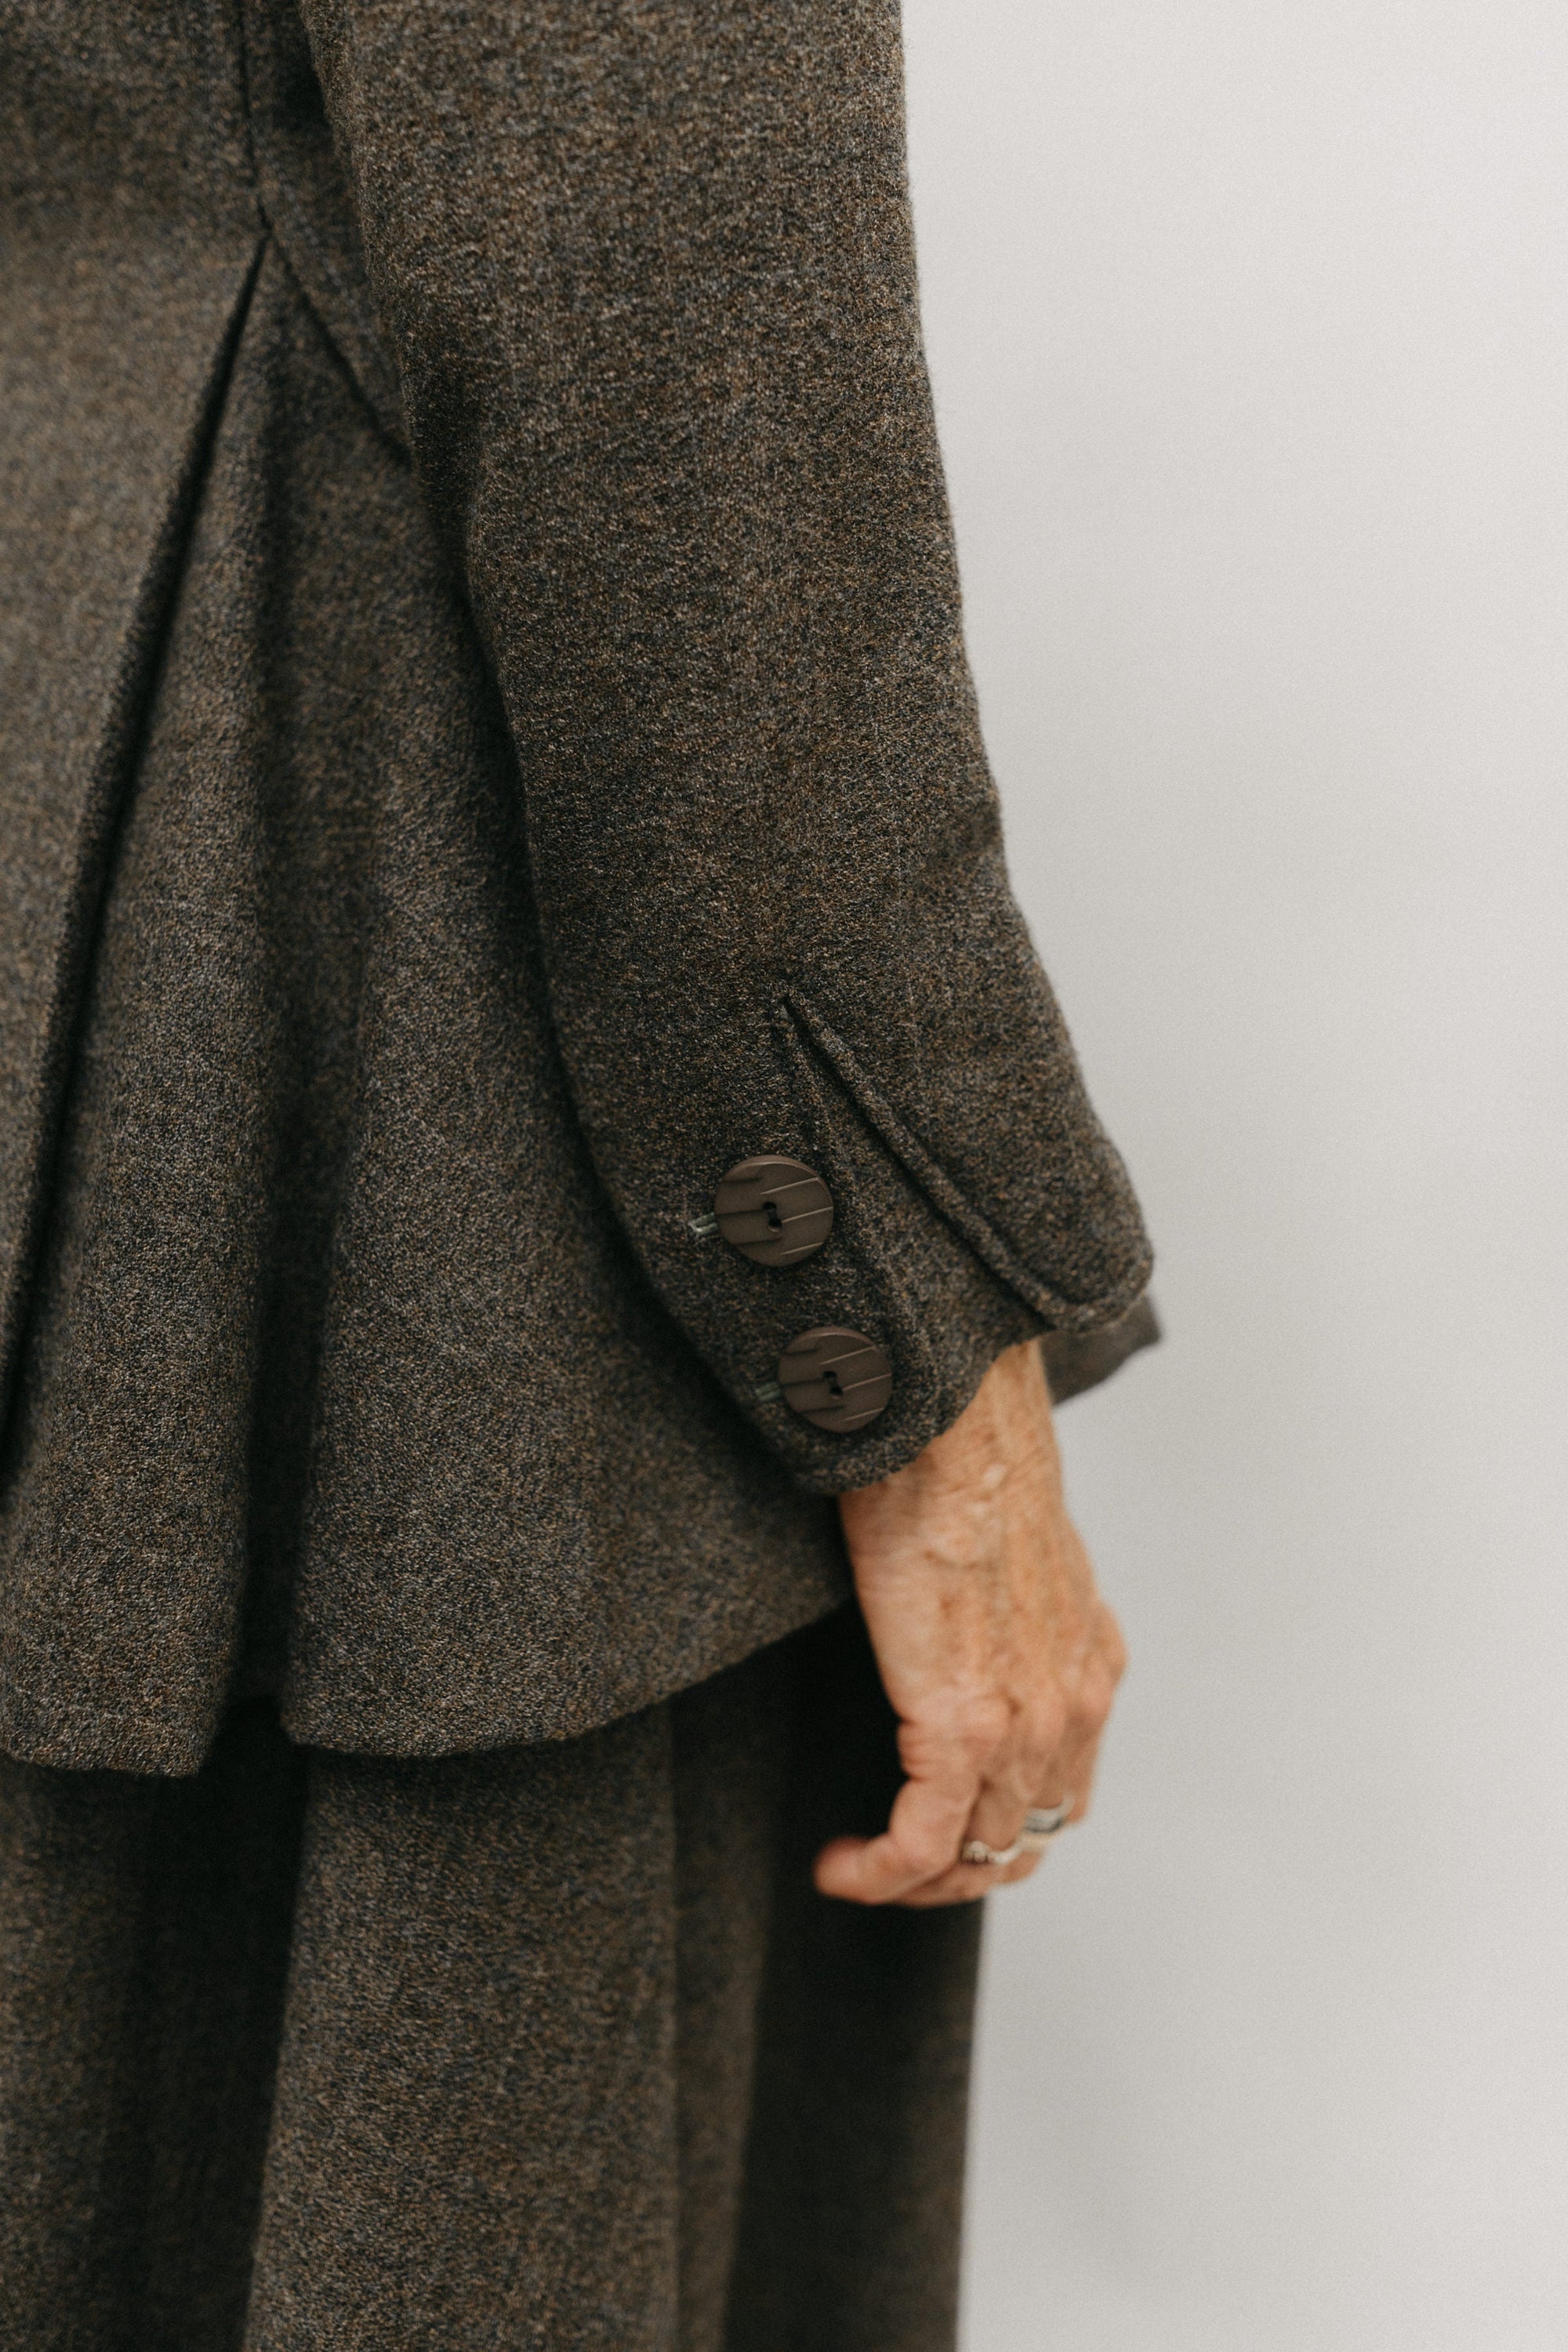 Close up of decorative button insets adorn of the cuff of the traveling jacket 